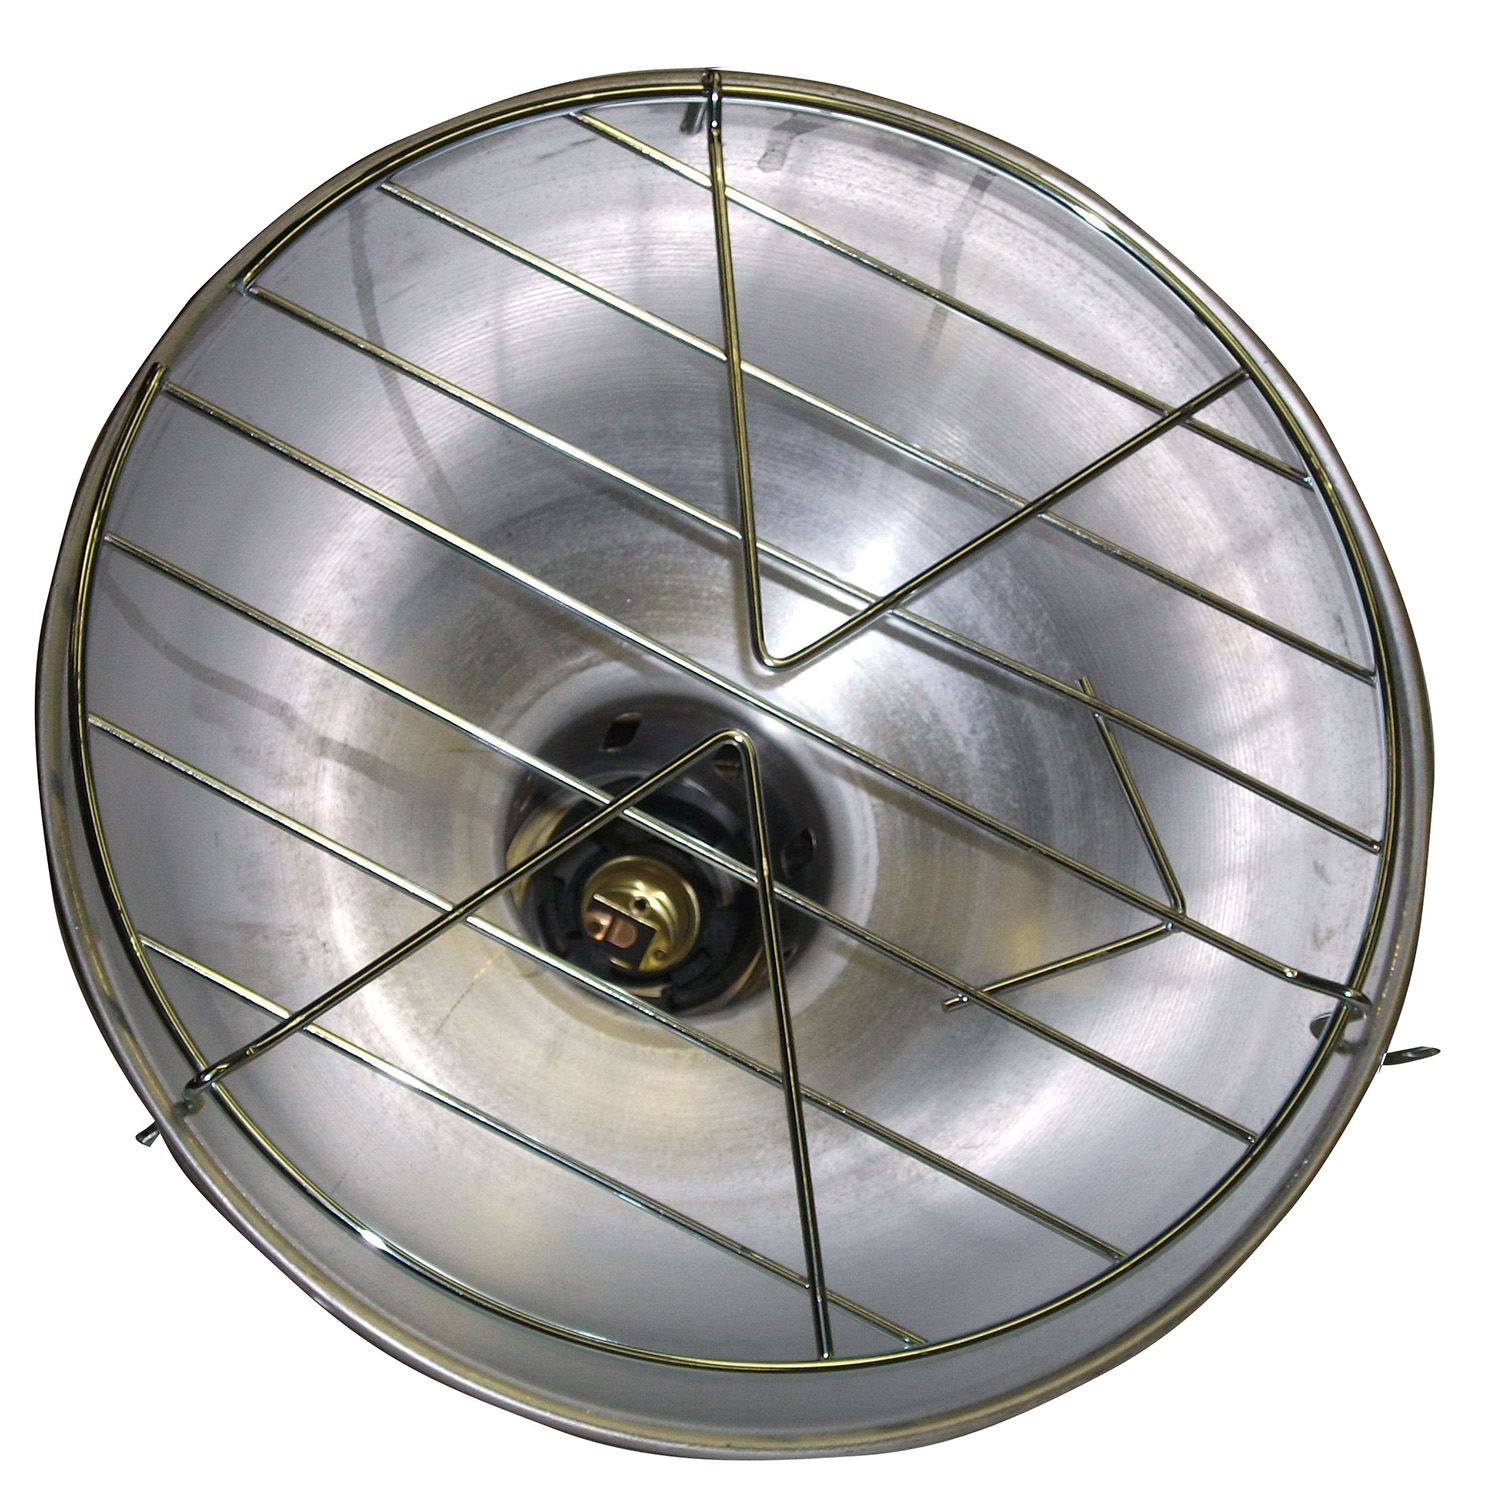 TURNOCK HEAT LAMP WITH STANDARD FITTING